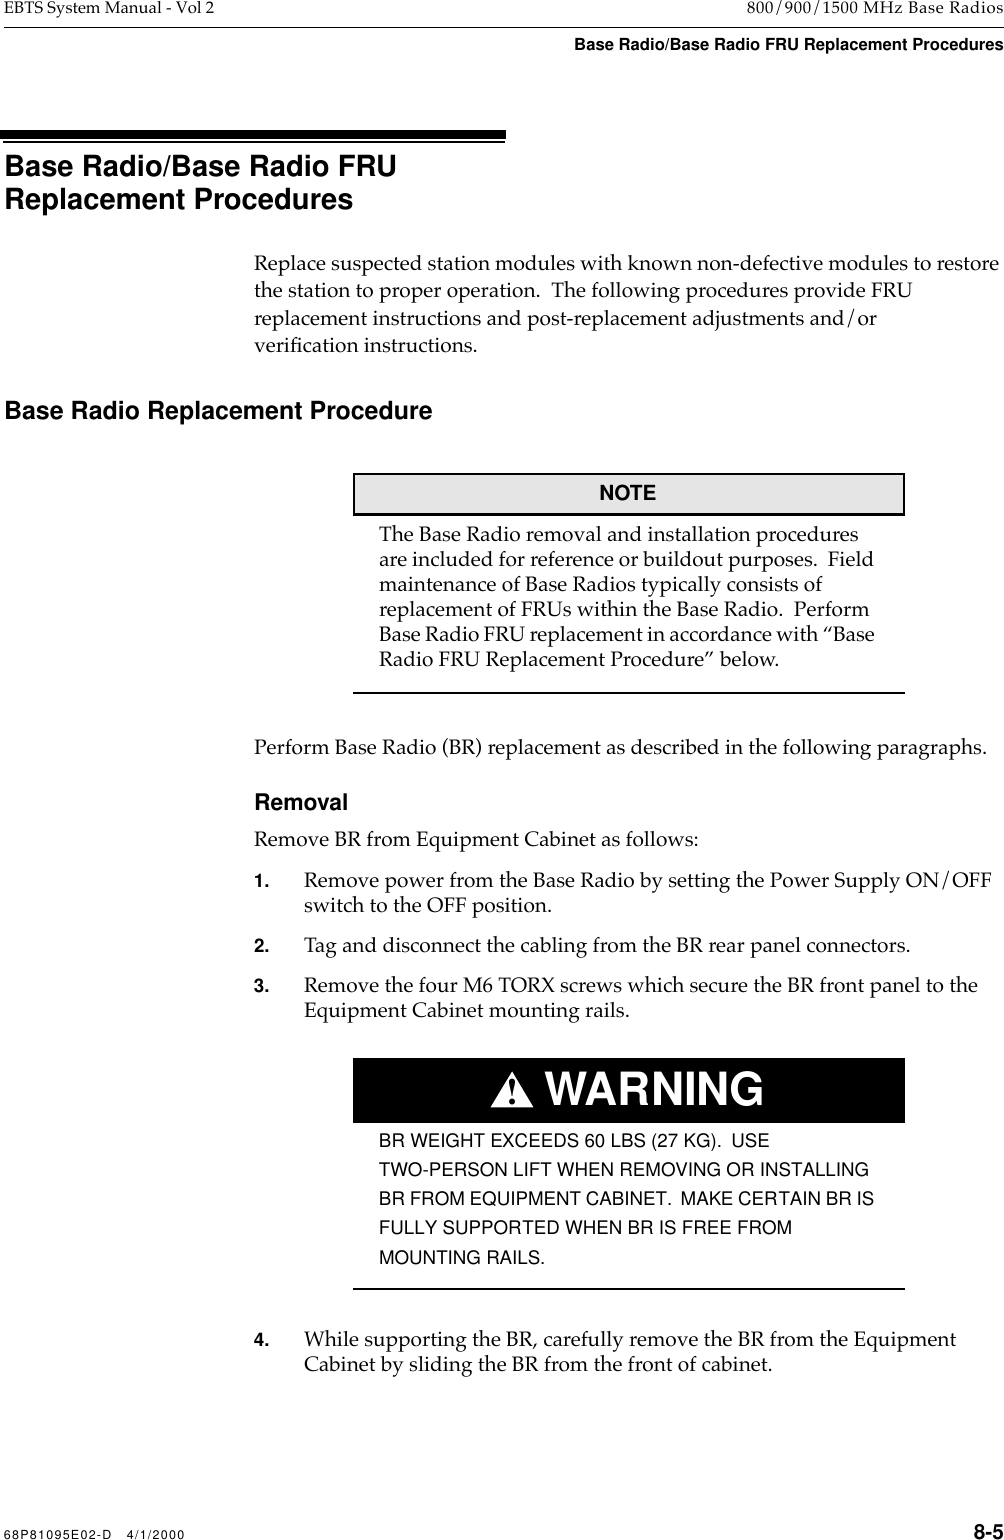  68P81095E02-D   4/1/2000 8-5 EBTS System Manual - Vol 2 800/900/1500 MHz Base Radios Base Radio/Base Radio FRU Replacement Procedures Base Radio/Base Radio FRU Replacement Procedures Replace suspected station modules with known non-defective modules to restore the station to proper operation.  The following procedures provide FRU replacement instructions and post-replacement adjustments and/or veriÞcation instructions. Base Radio Replacement ProcedureNOTE The Base Radio removal and installation procedures are included for reference or buildout purposes.  Field maintenance of Base Radios typically consists of replacement of FRUs within the Base Radio.  Perform Base Radio FRU replacement in accordance with ÒBase  Radio FRU Replacement ProcedureÓ below.Perform Base Radio (BR) replacement as described in the following paragraphs. Removal Remove BR from Equipment Cabinet as follows: 1. Remove power from the Base Radio by setting the Power Supply ON/OFF switch to the OFF position. 2. Tag and disconnect the cabling from the BR rear panel connectors. 3. Remove the four M6 TORX screws which secure the BR front panel to the Equipment Cabinet mounting rails.WARNING! BR WEIGHT EXCEEDS 60 LBS (27 KG).  USE TWO-PERSON LIFT WHEN REMOVING OR INSTALLING BR FROM EQUIPMENT CABINET.  MAKE CERTAIN BR IS FULLY SUPPORTED WHEN BR IS FREE FROM  MOUNTING RAILS. 4. While supporting the BR, carefully remove the BR from the Equipment Cabinet by sliding the BR from the front of cabinet.